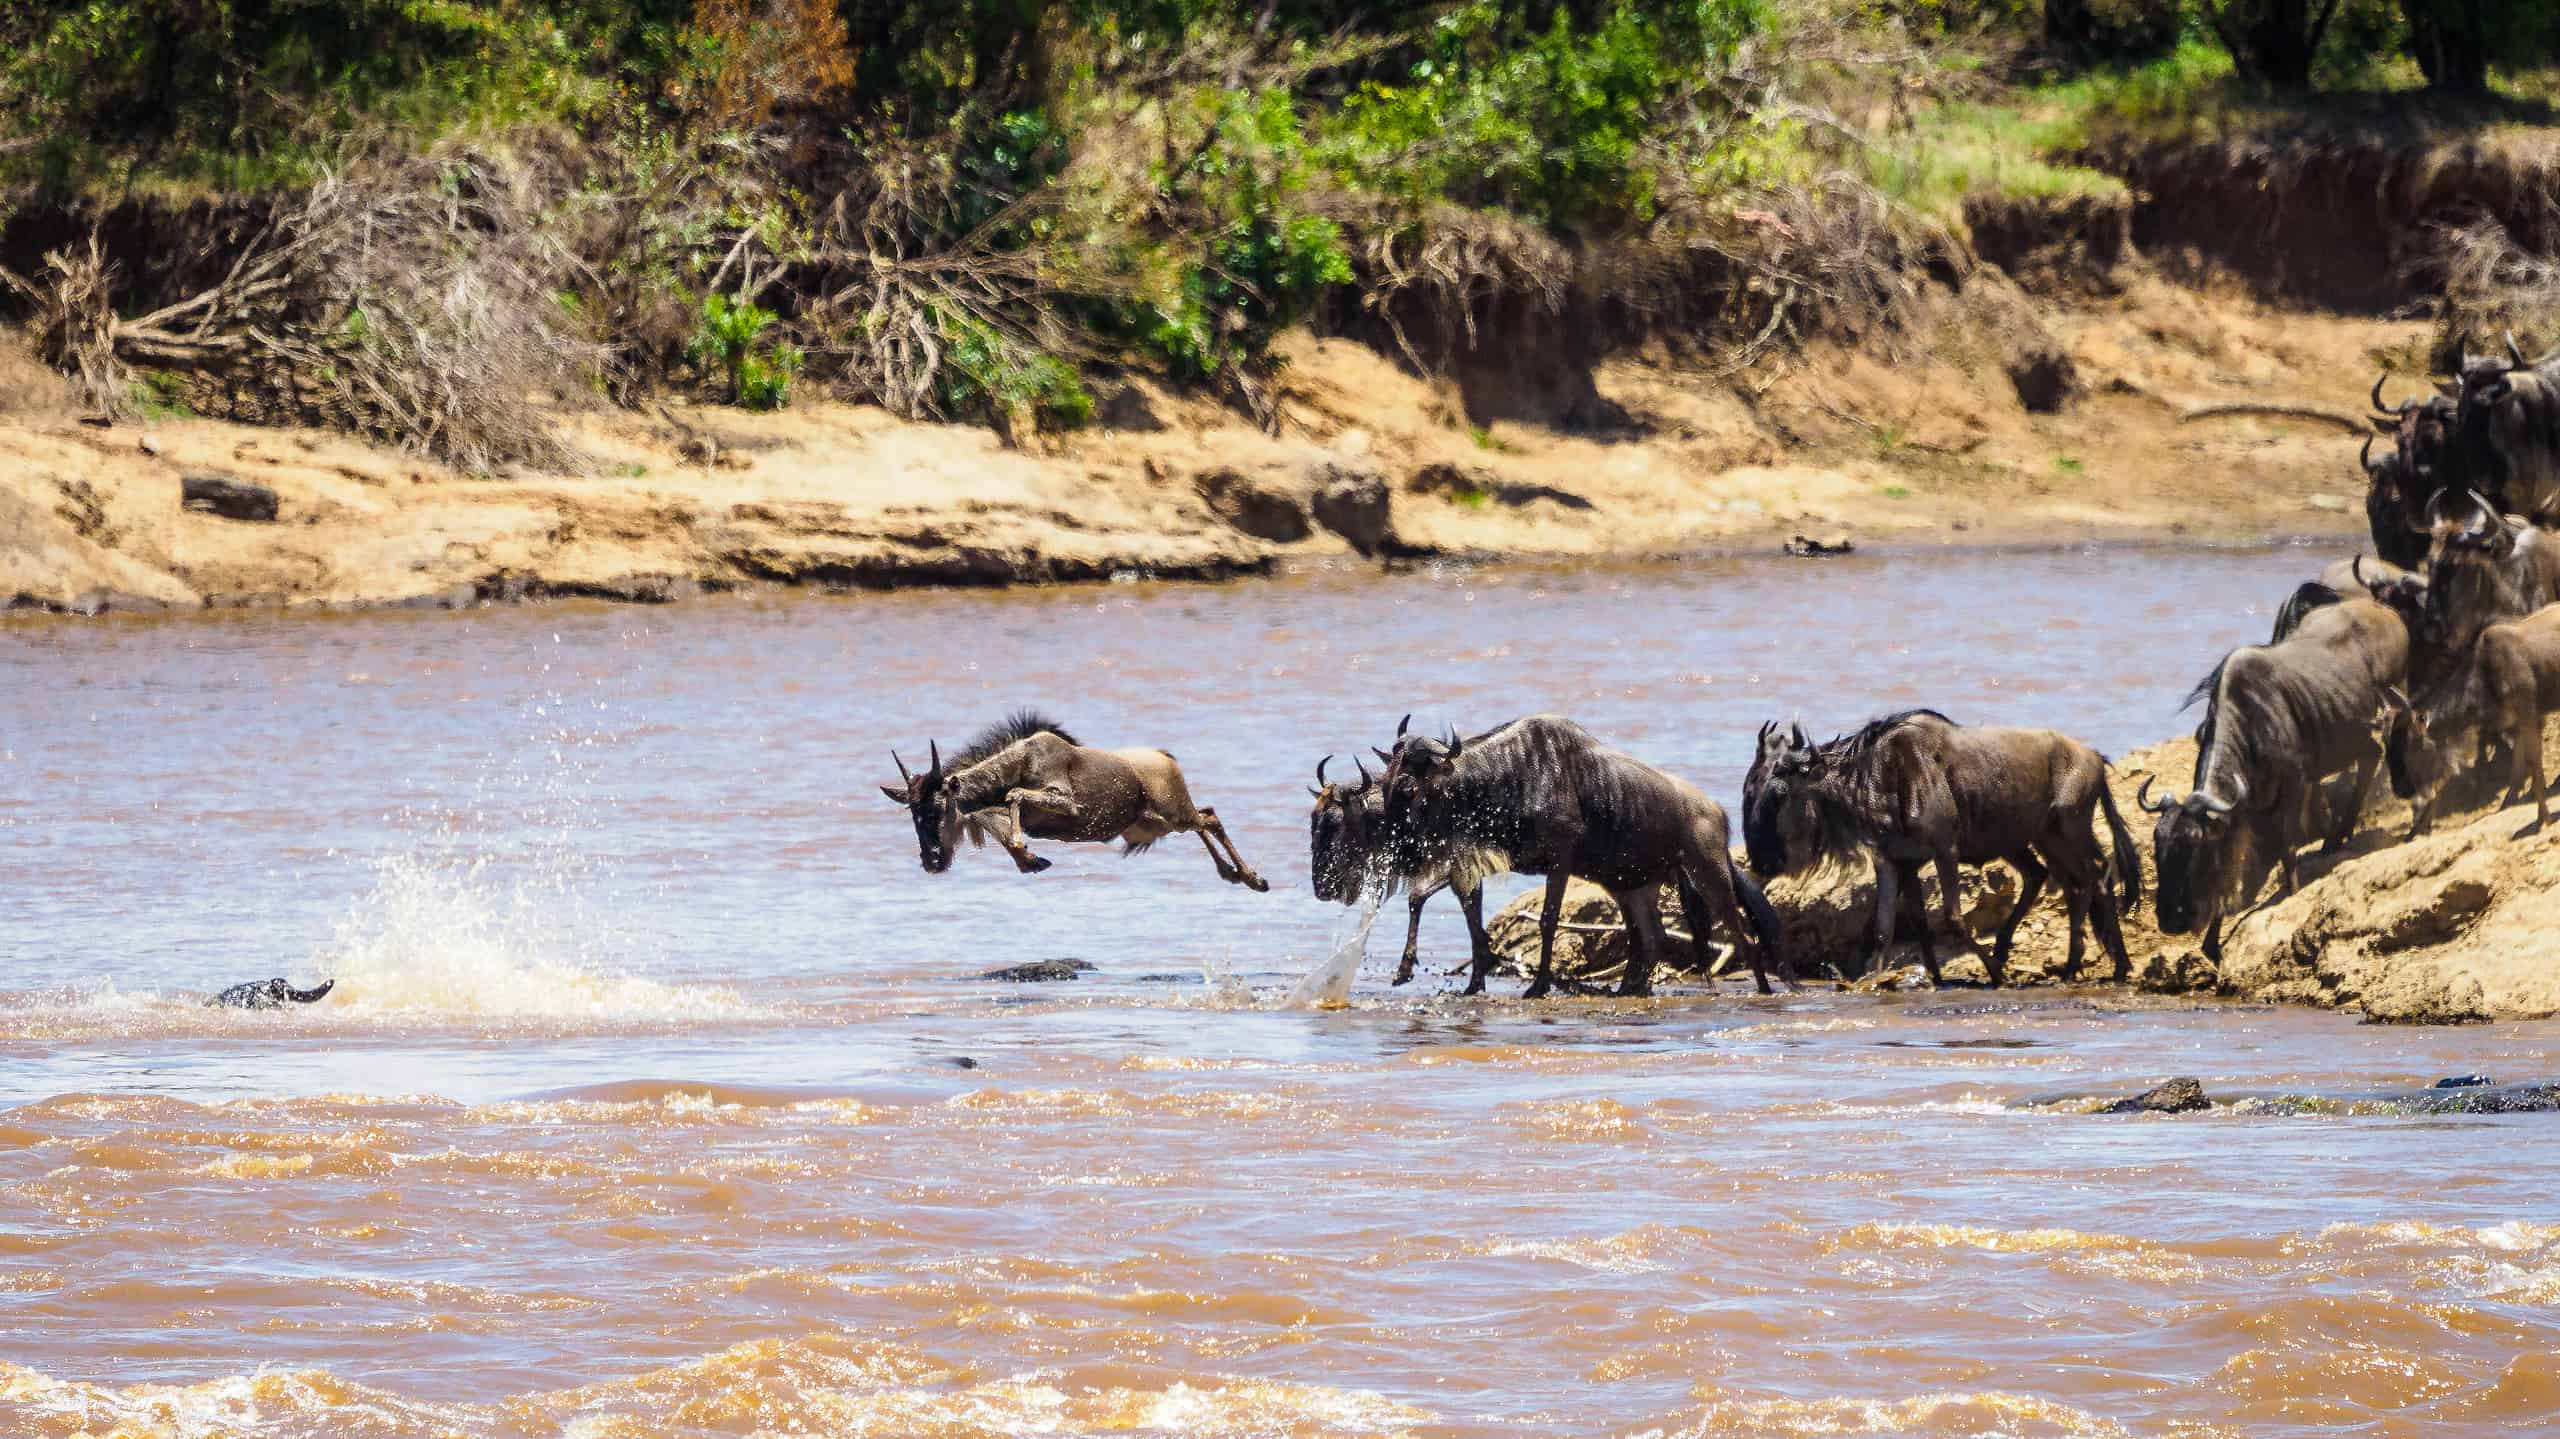 Part of the Great Migration, a herd of wildebeest line up to cross the Mara river in the Masai Mara national reserve